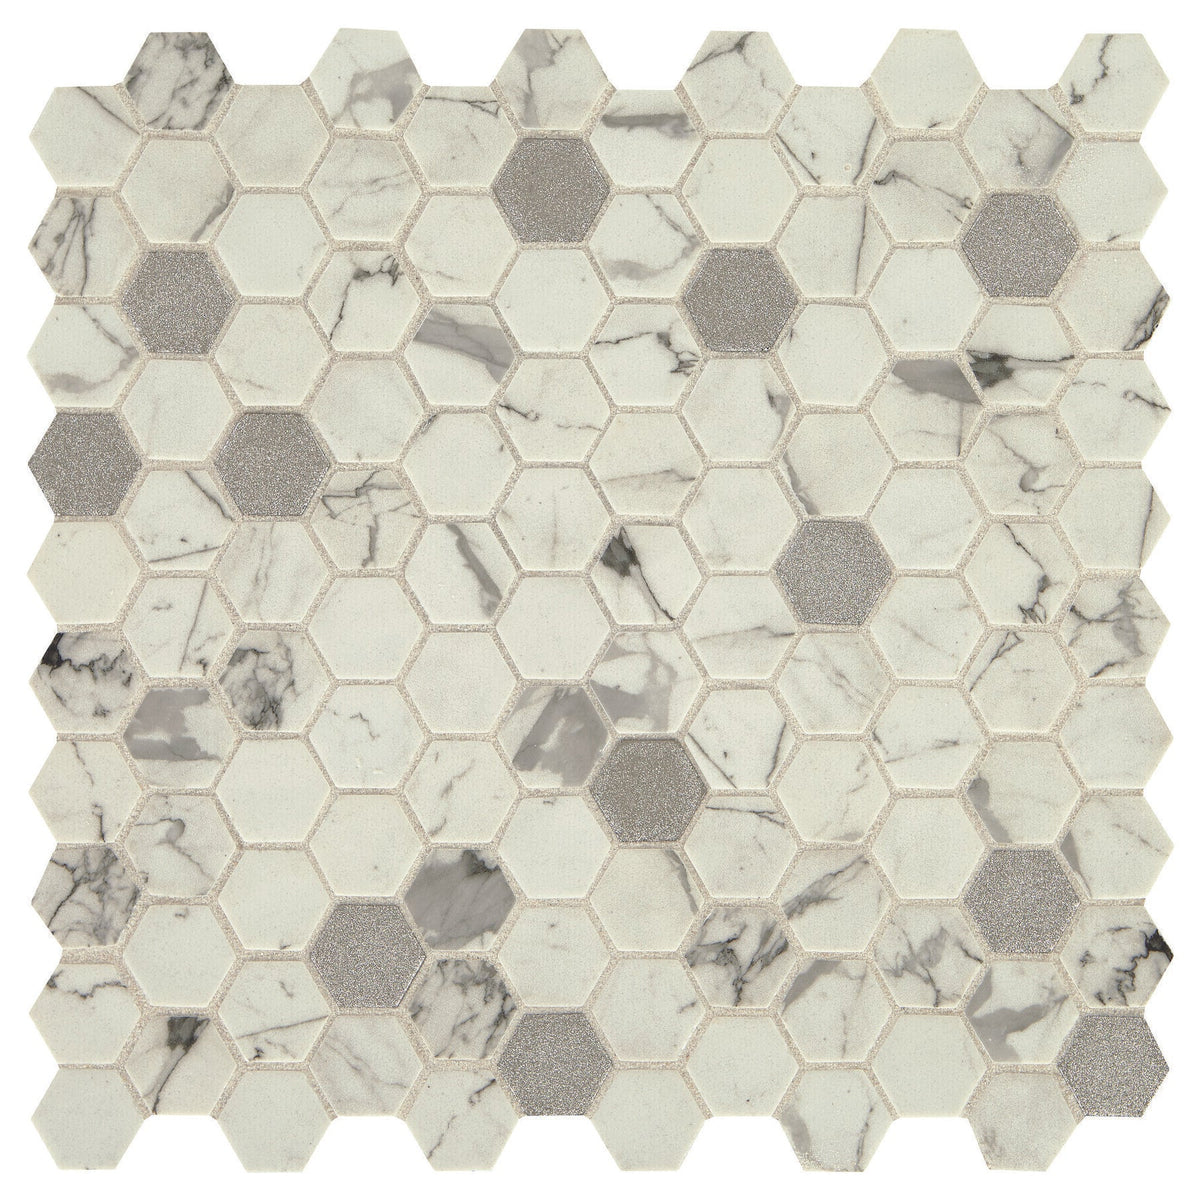 Daltile Uptown Glass 1 in. x 1 in. Metallic Hex Glass Mosaic - Posh Bubbly